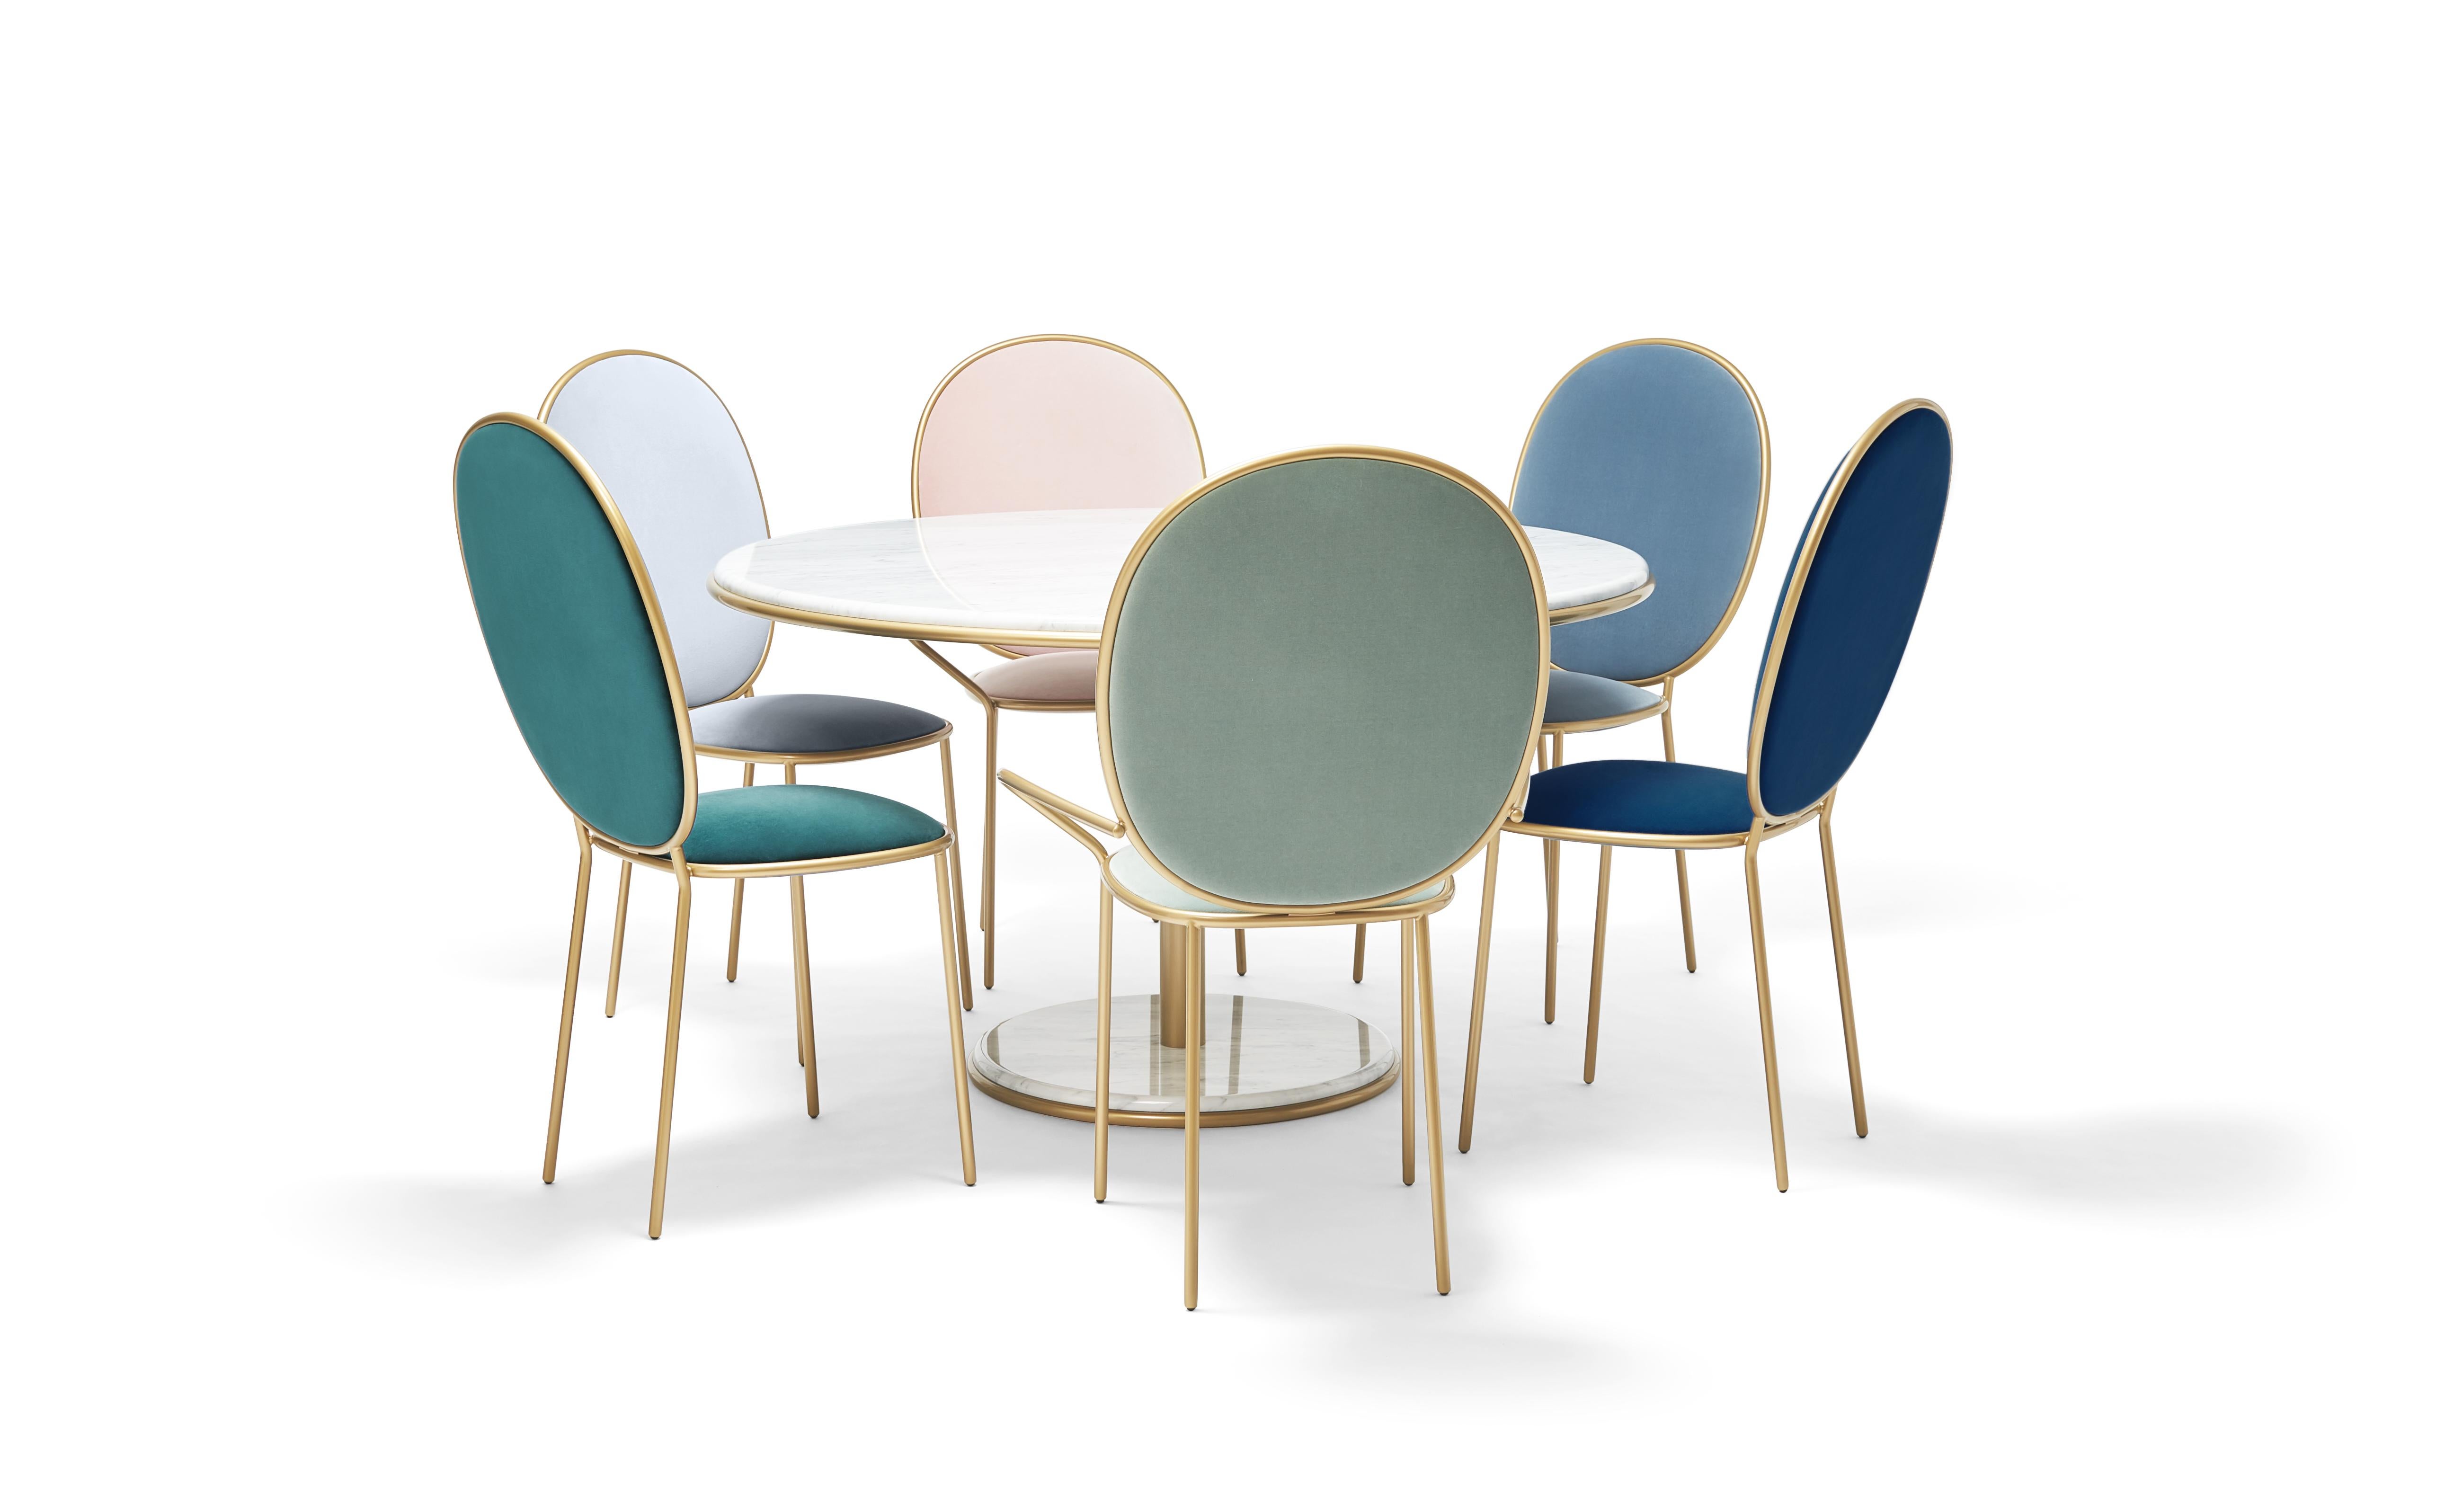 Contemporary Fumo brown velvet upholstered dining chair - Stay by Nika Zupanc

The Stay Family turns everyday seating into a special occasion. The dining chair and dining armchair are variations on an elegant social theme whilst the dining table